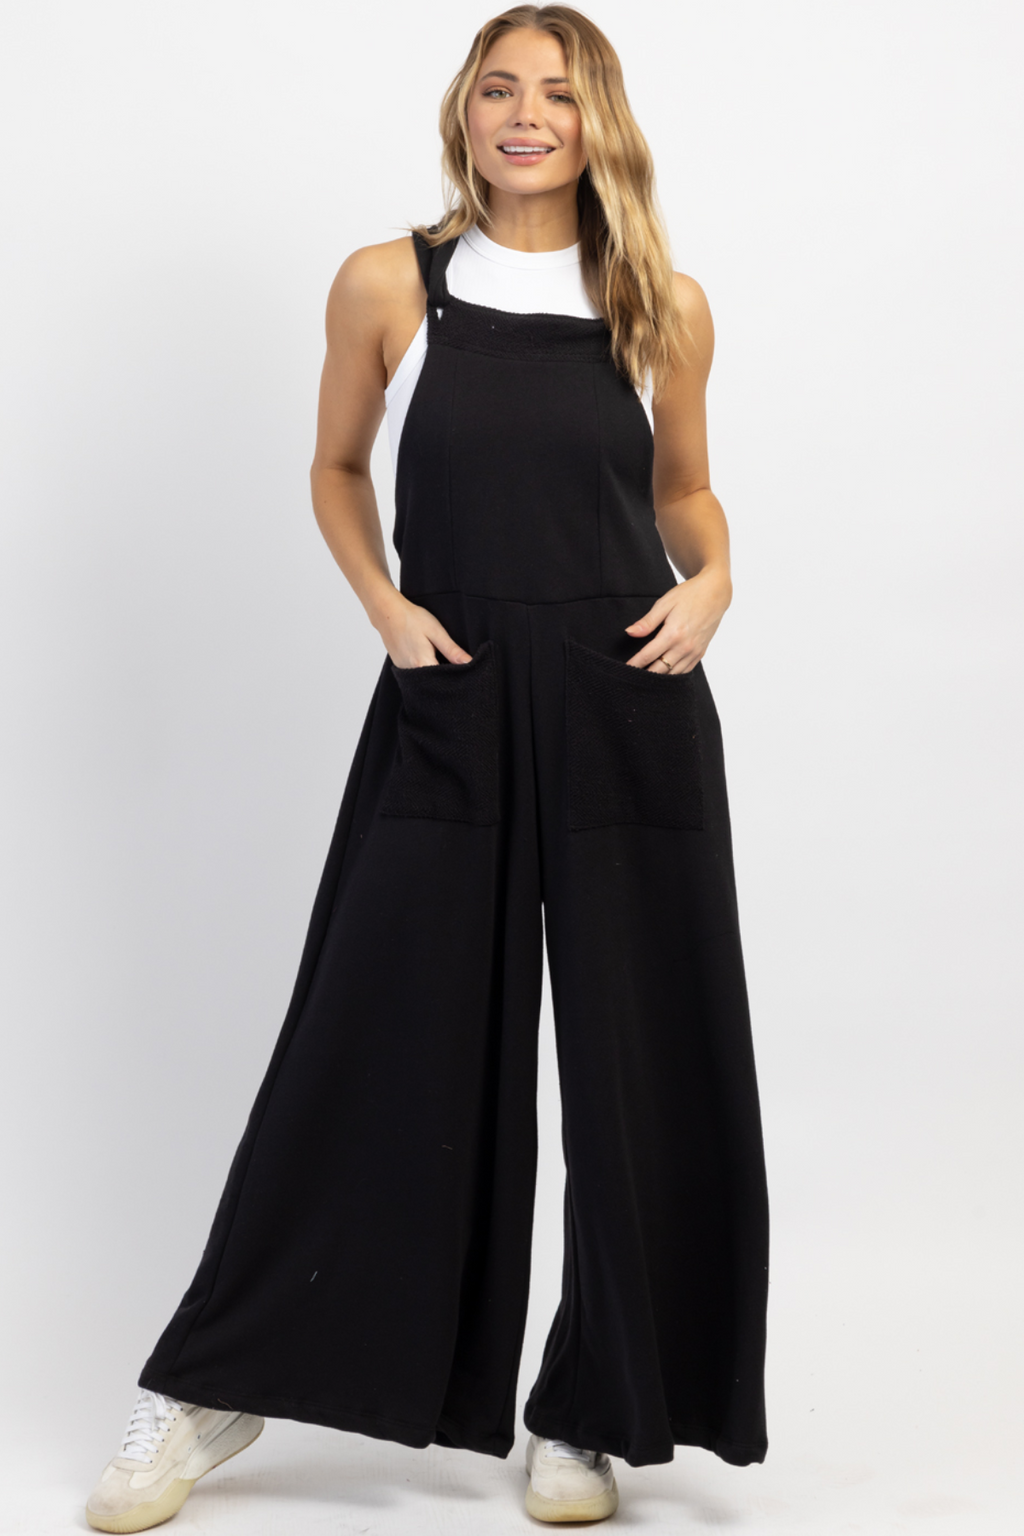 MOXIE MIDNIGHT RELAXED COTTON JUMPSUIT